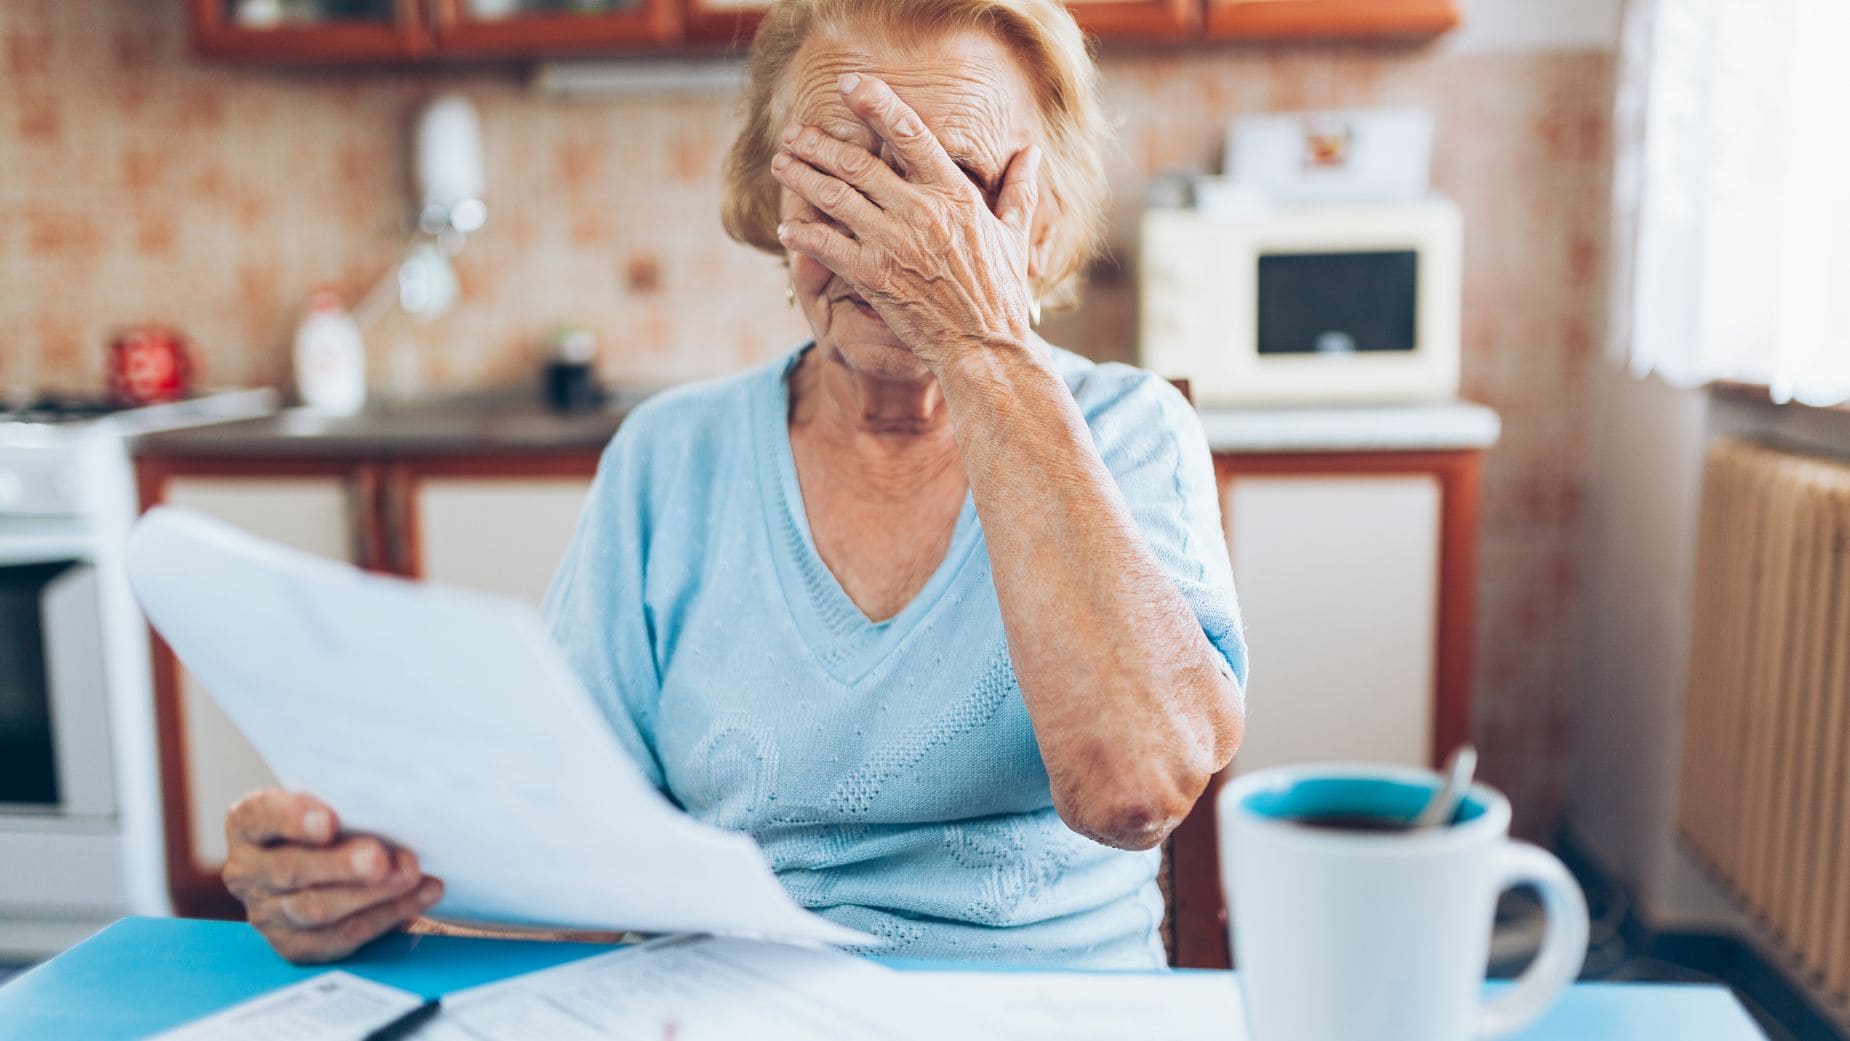 Making this mistake could make you lose a big part of your Social Security monthly check